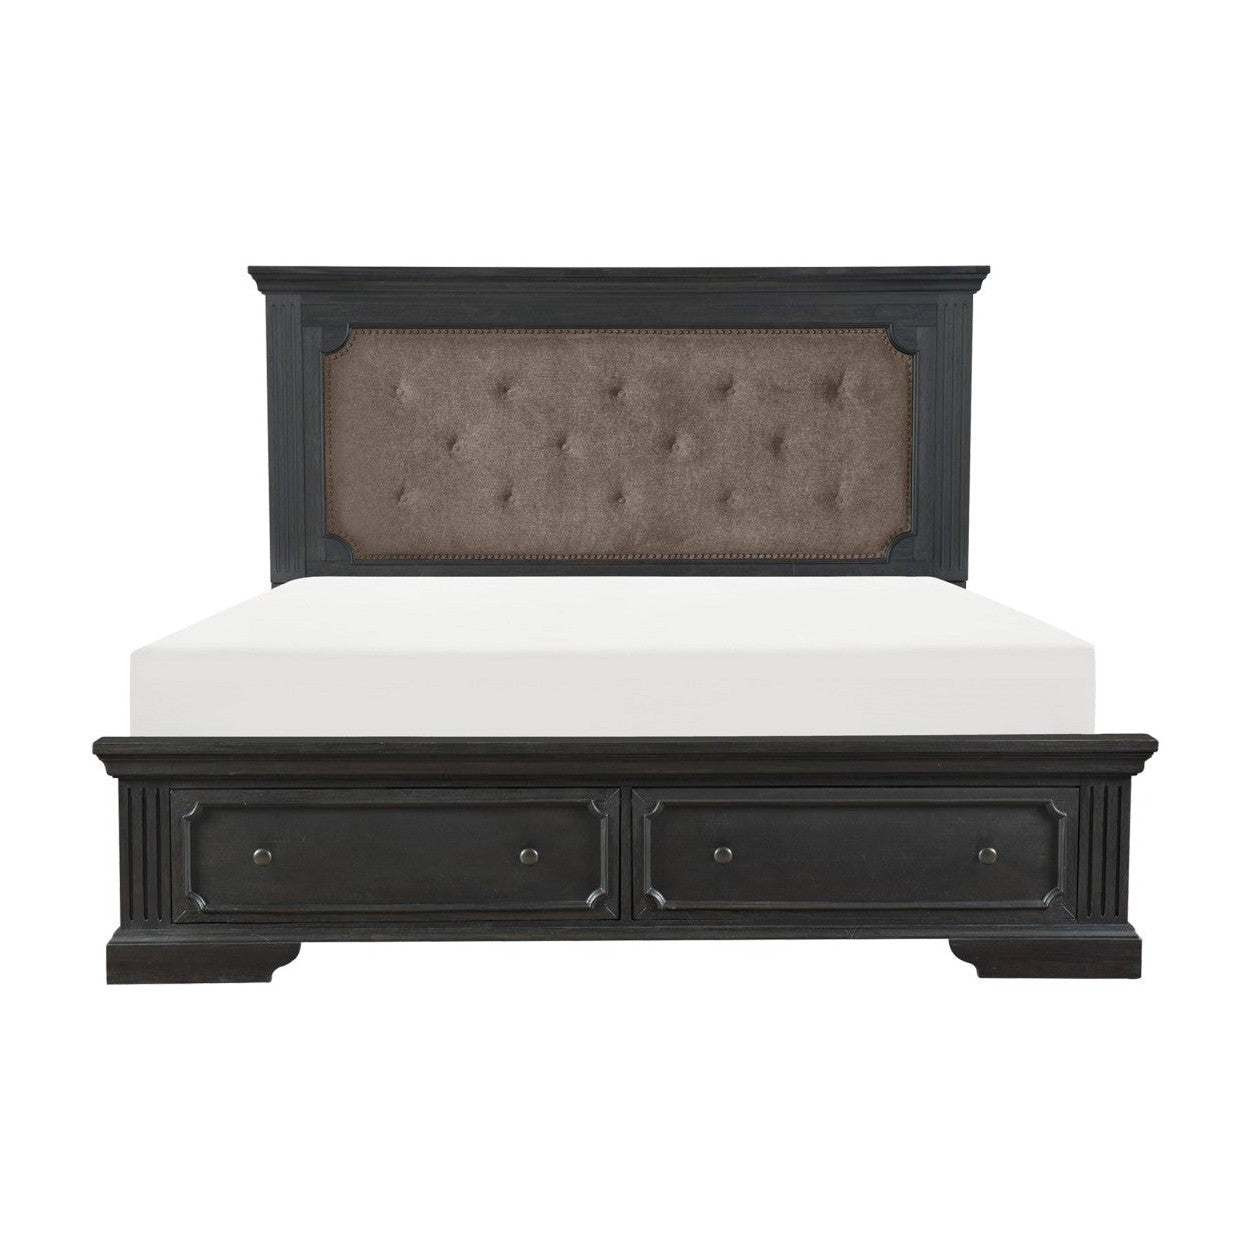 (3) Queen Platform Bed with Footboard Drawers 1647-1*